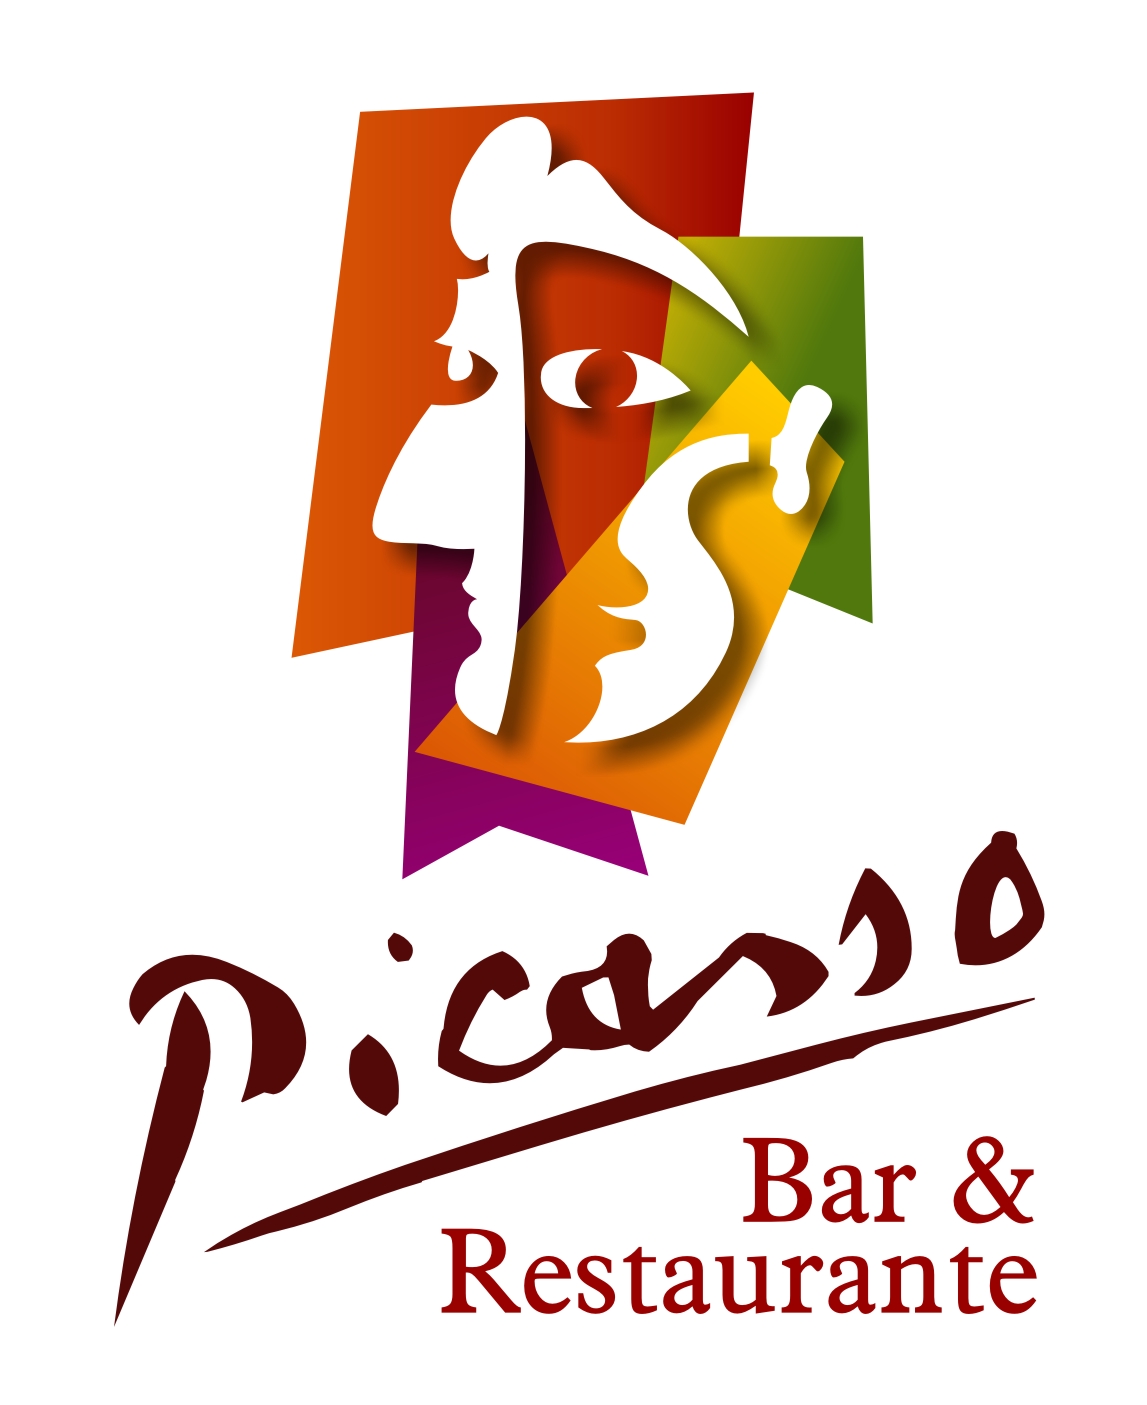 Picasso Practical Spanish - Panama-isms (Part 1)